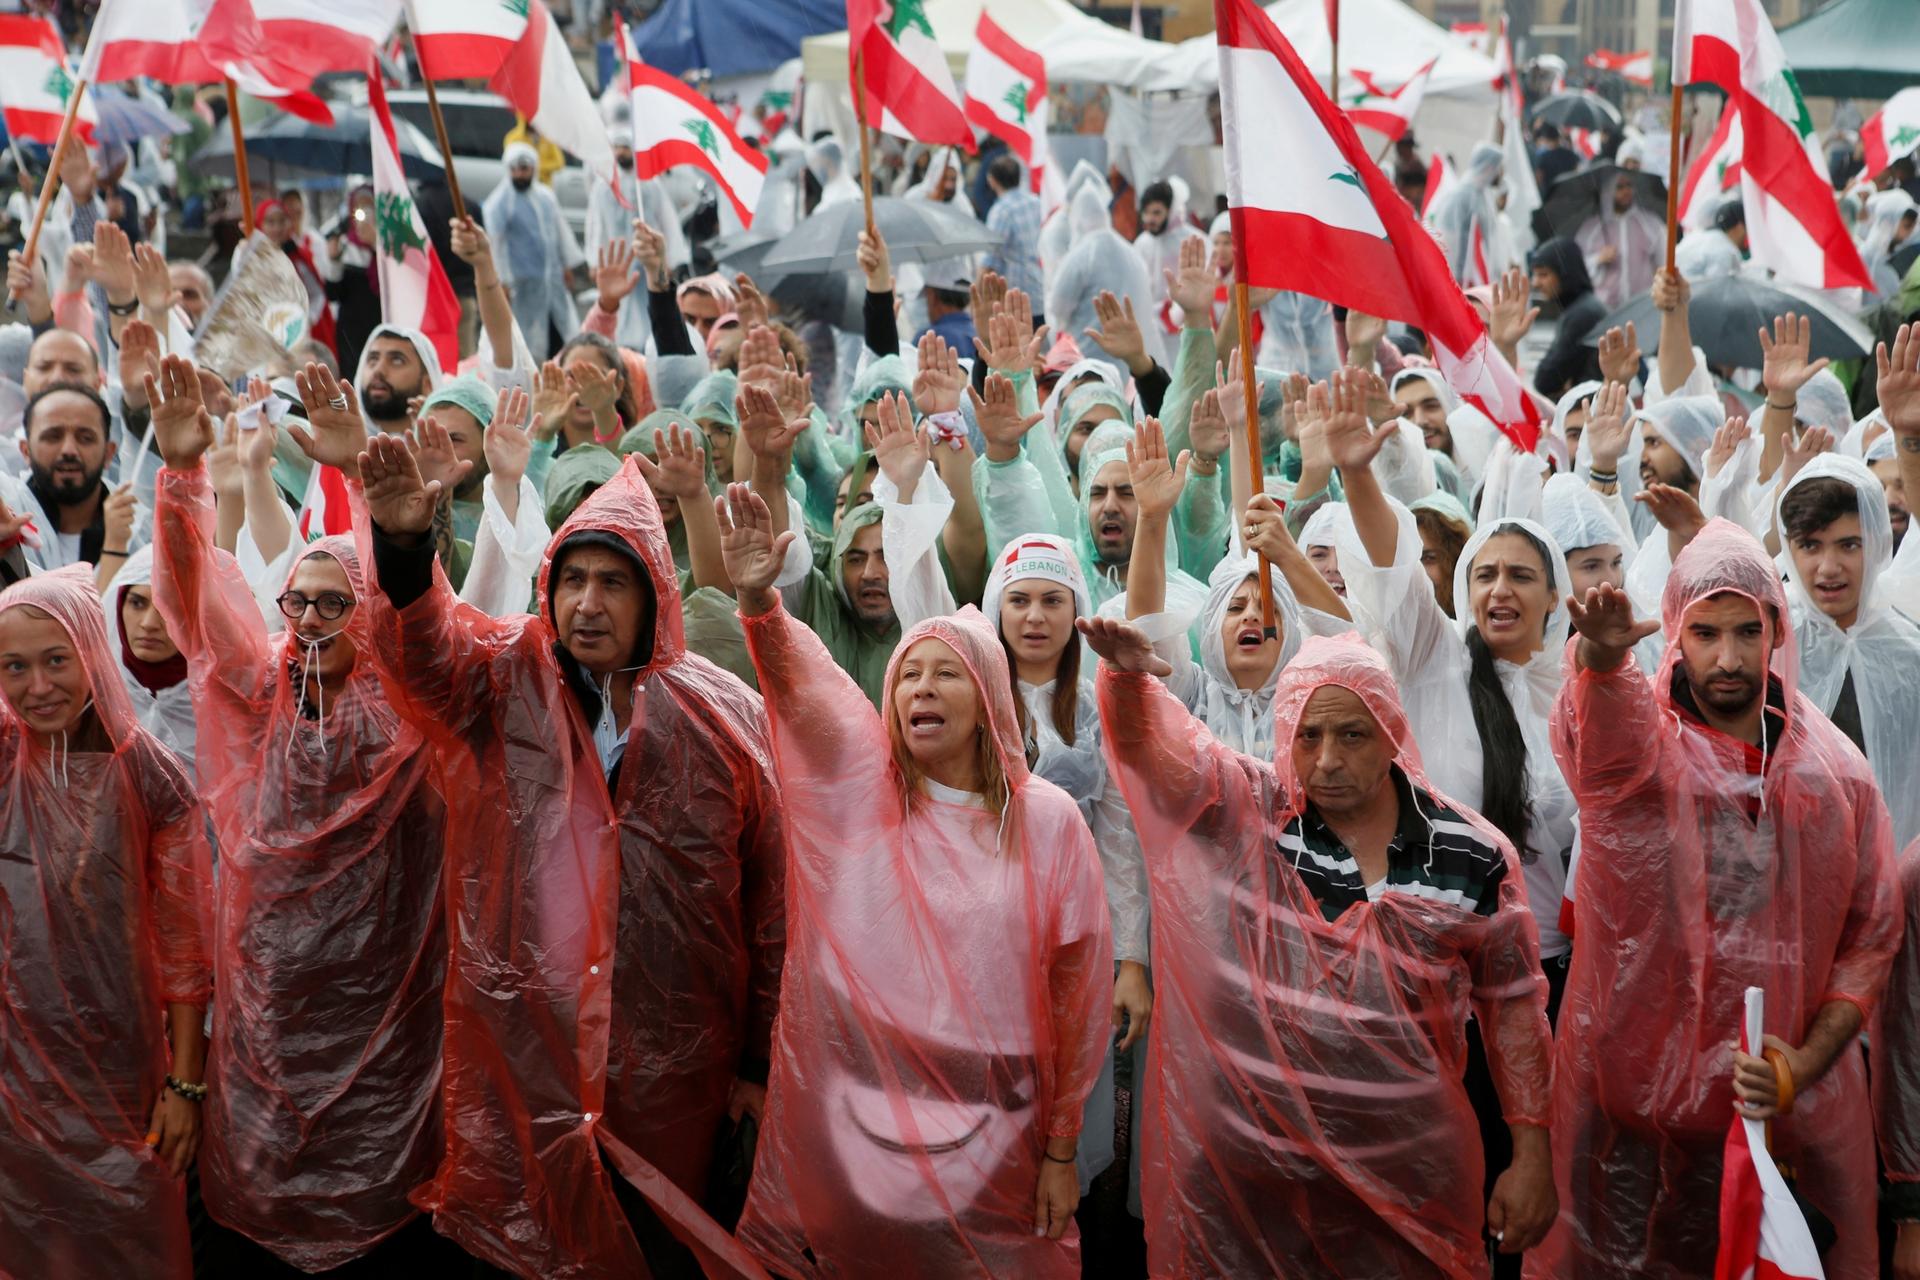 Demonstrators, covered in rain coats, gesture and carry flags during ongoing anti-government protests in downtown Beirut, Lebanon, Oct. 24, 2019. 